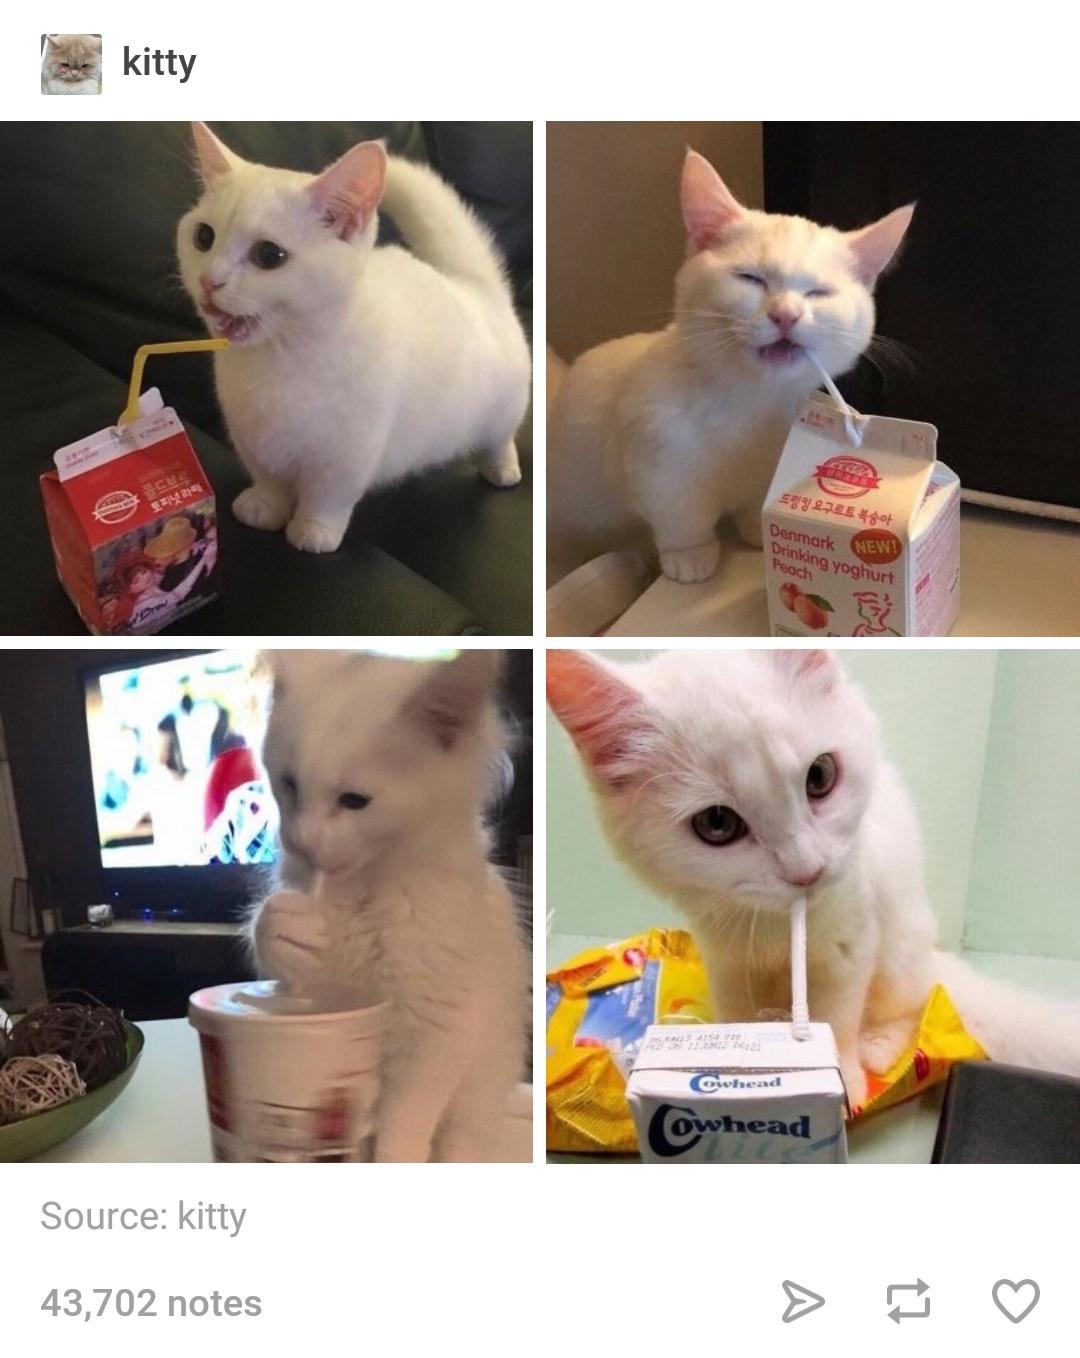 funny memes and pics - photo caption - kitty Cocccon Scur Dre at Source kitty 43,702 notes B Denmark New! Drinking yoghurt Peach whead owhead